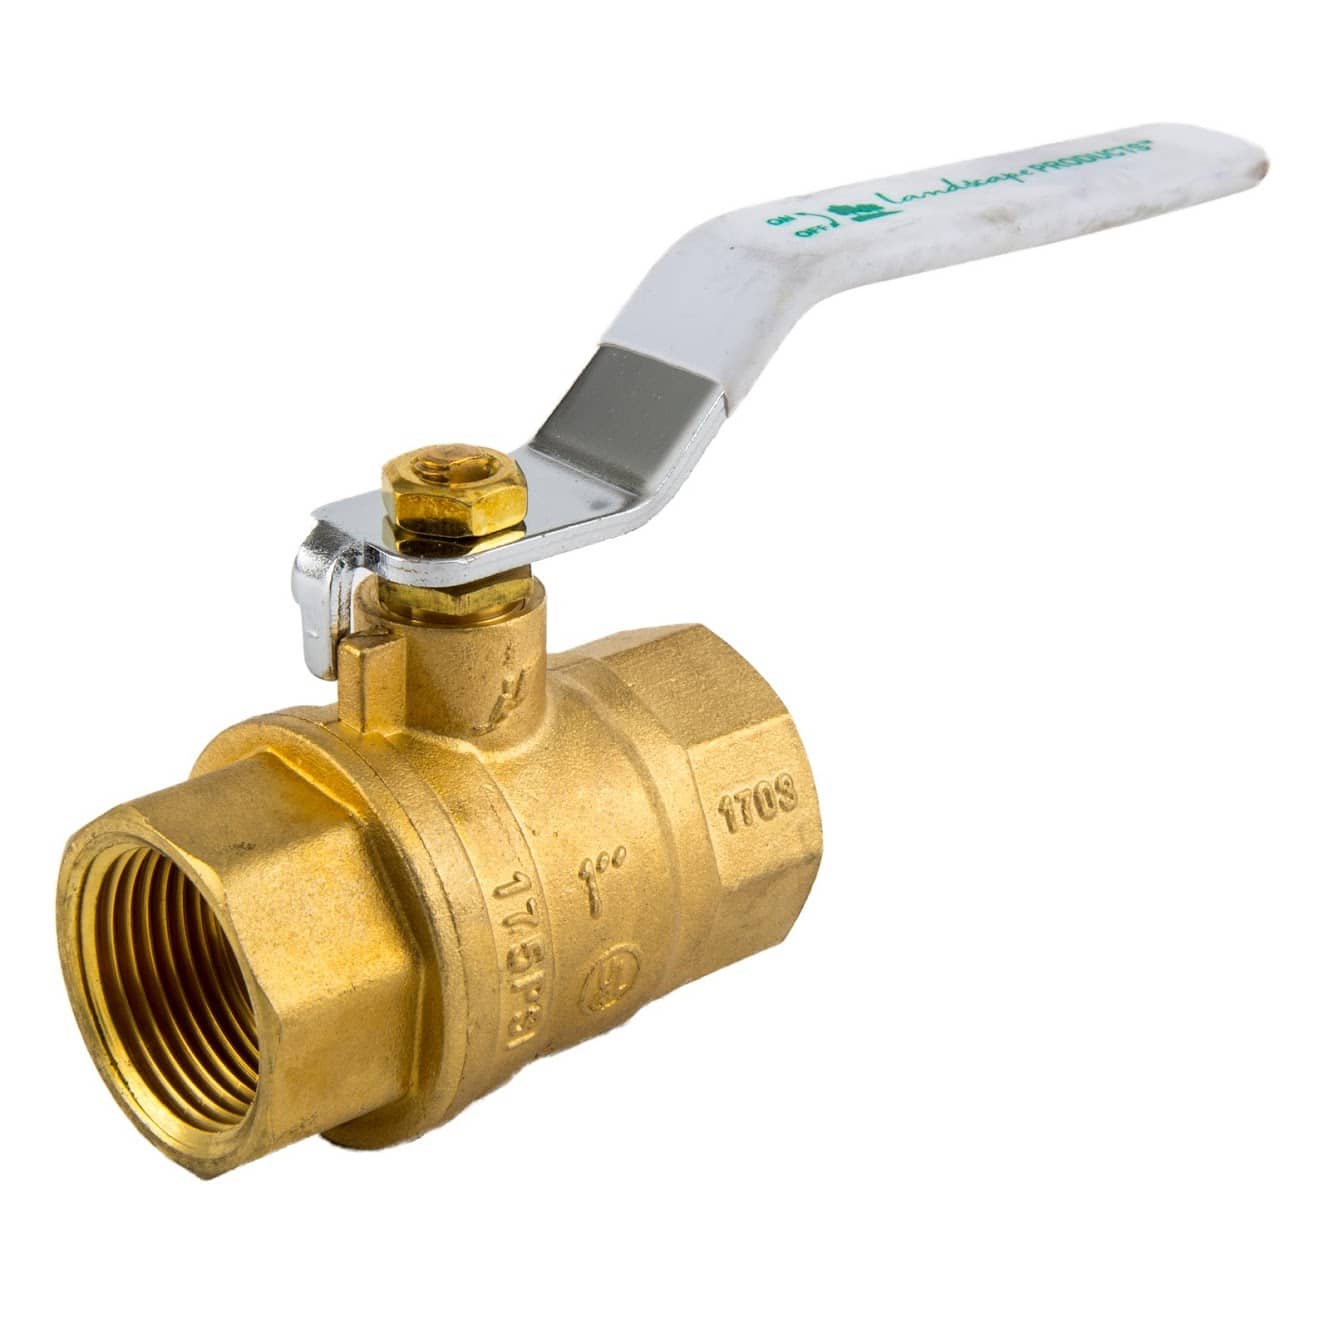 1-inch Full Port Brass Ball Valve - Landscape Products Inc.